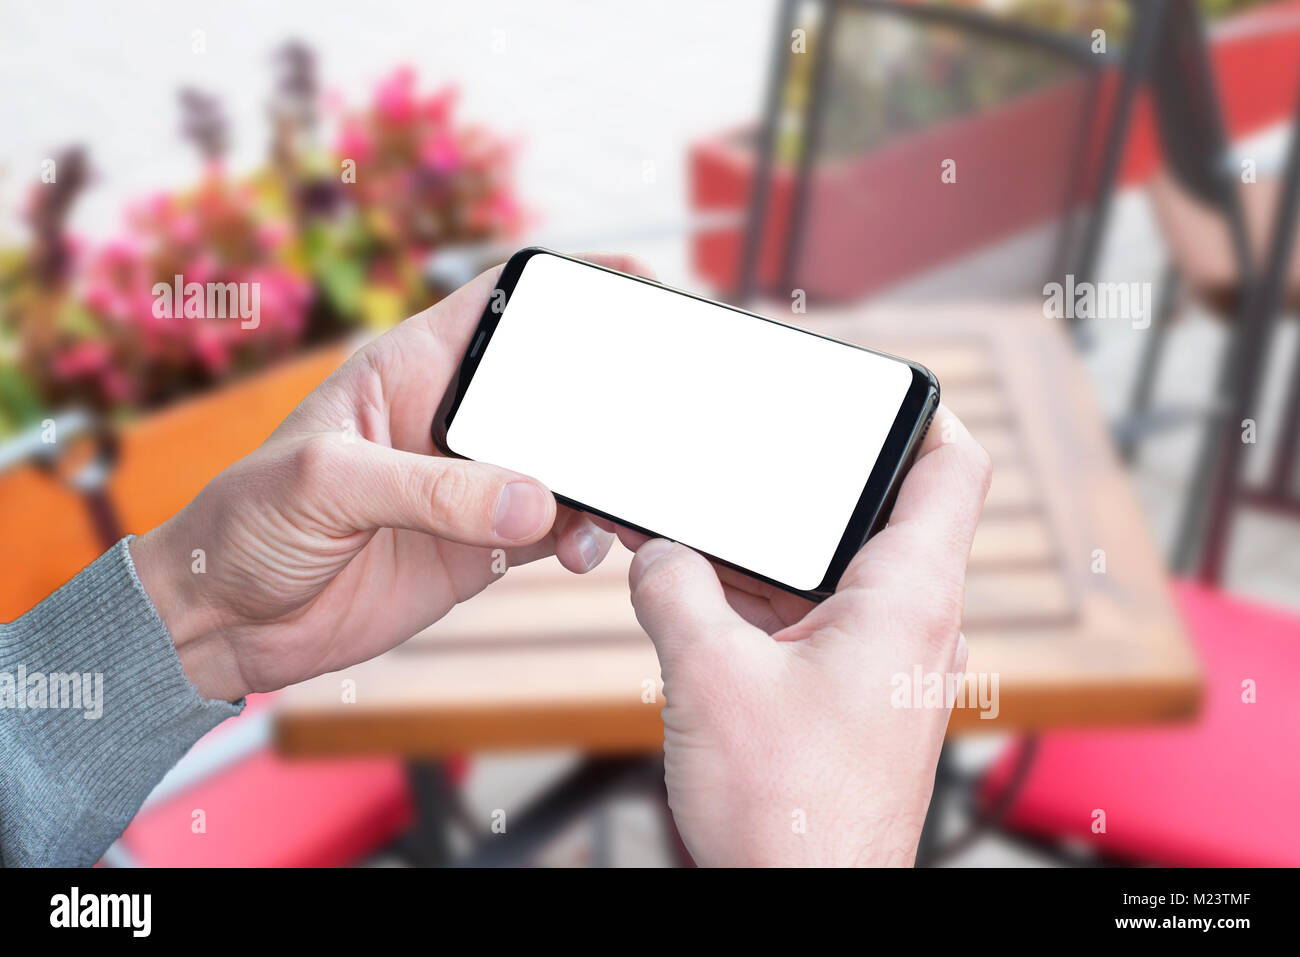 Man hold smart phone in horizontal position with isolated screen for mockup, app, video, game design presentation. Coffee shop in background. Stock Photo